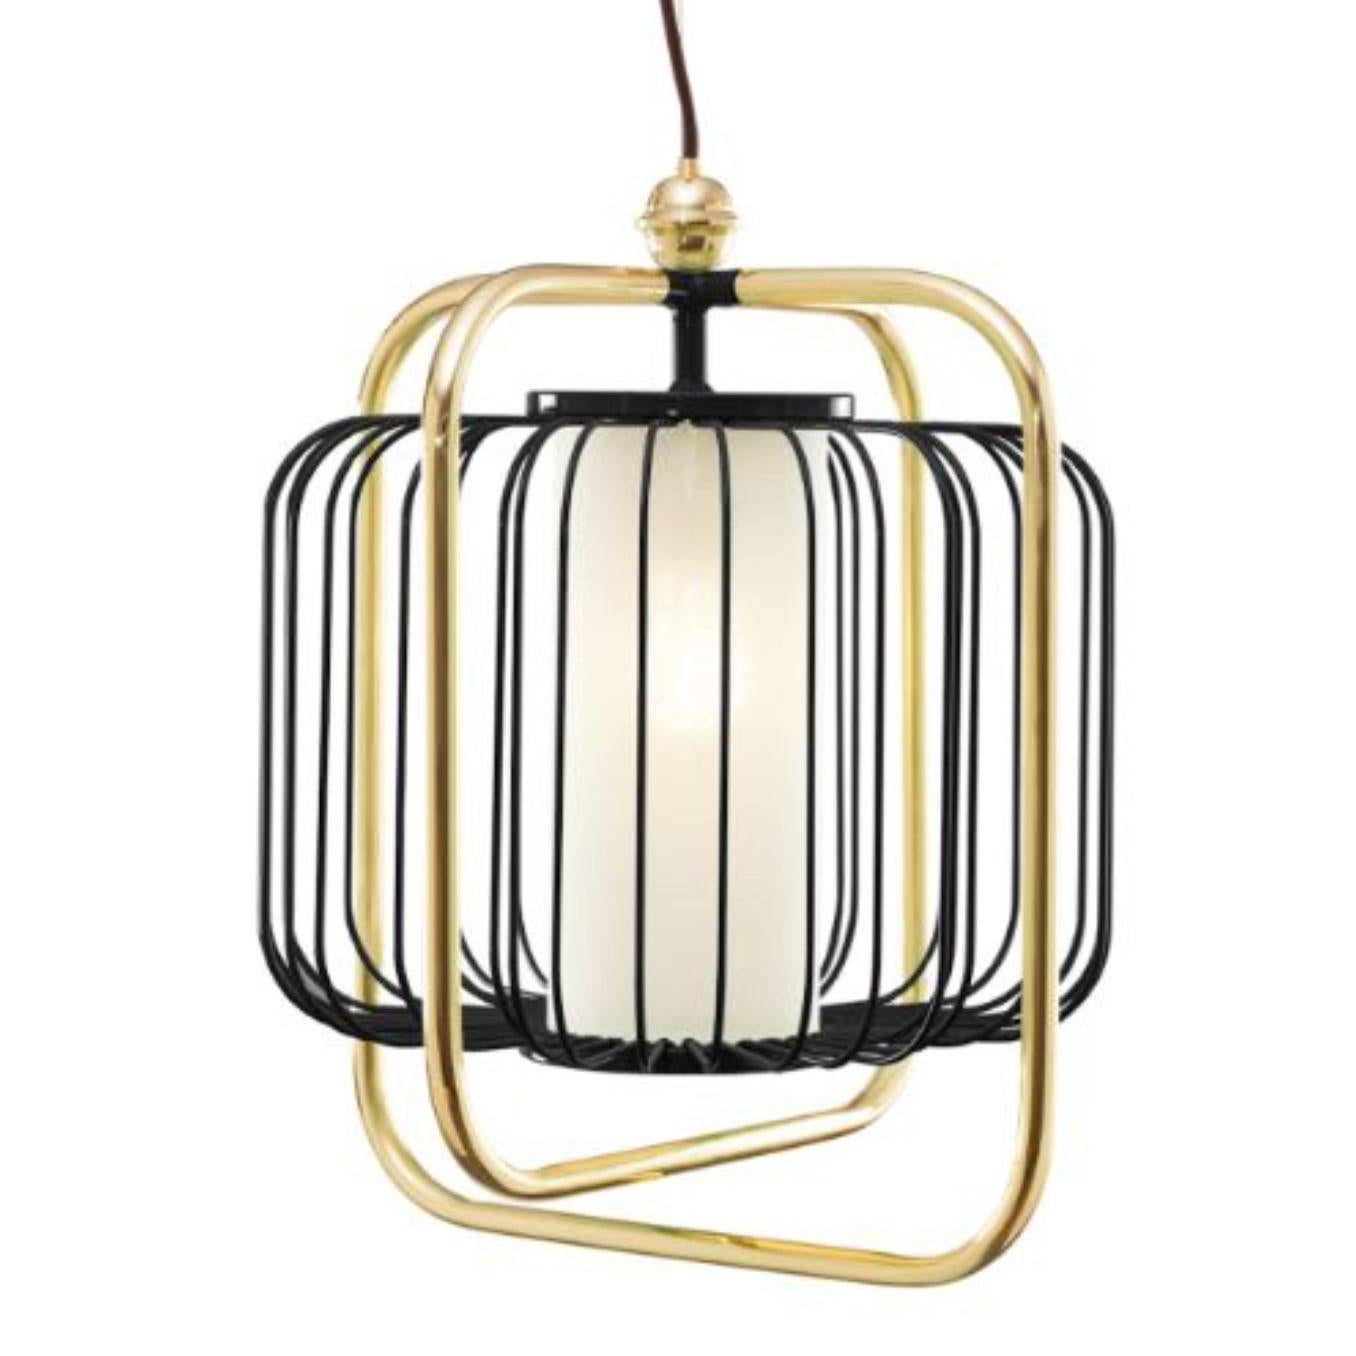 Portuguese Brass and Lipstick Jules III Suspension Lamp by Dooq For Sale